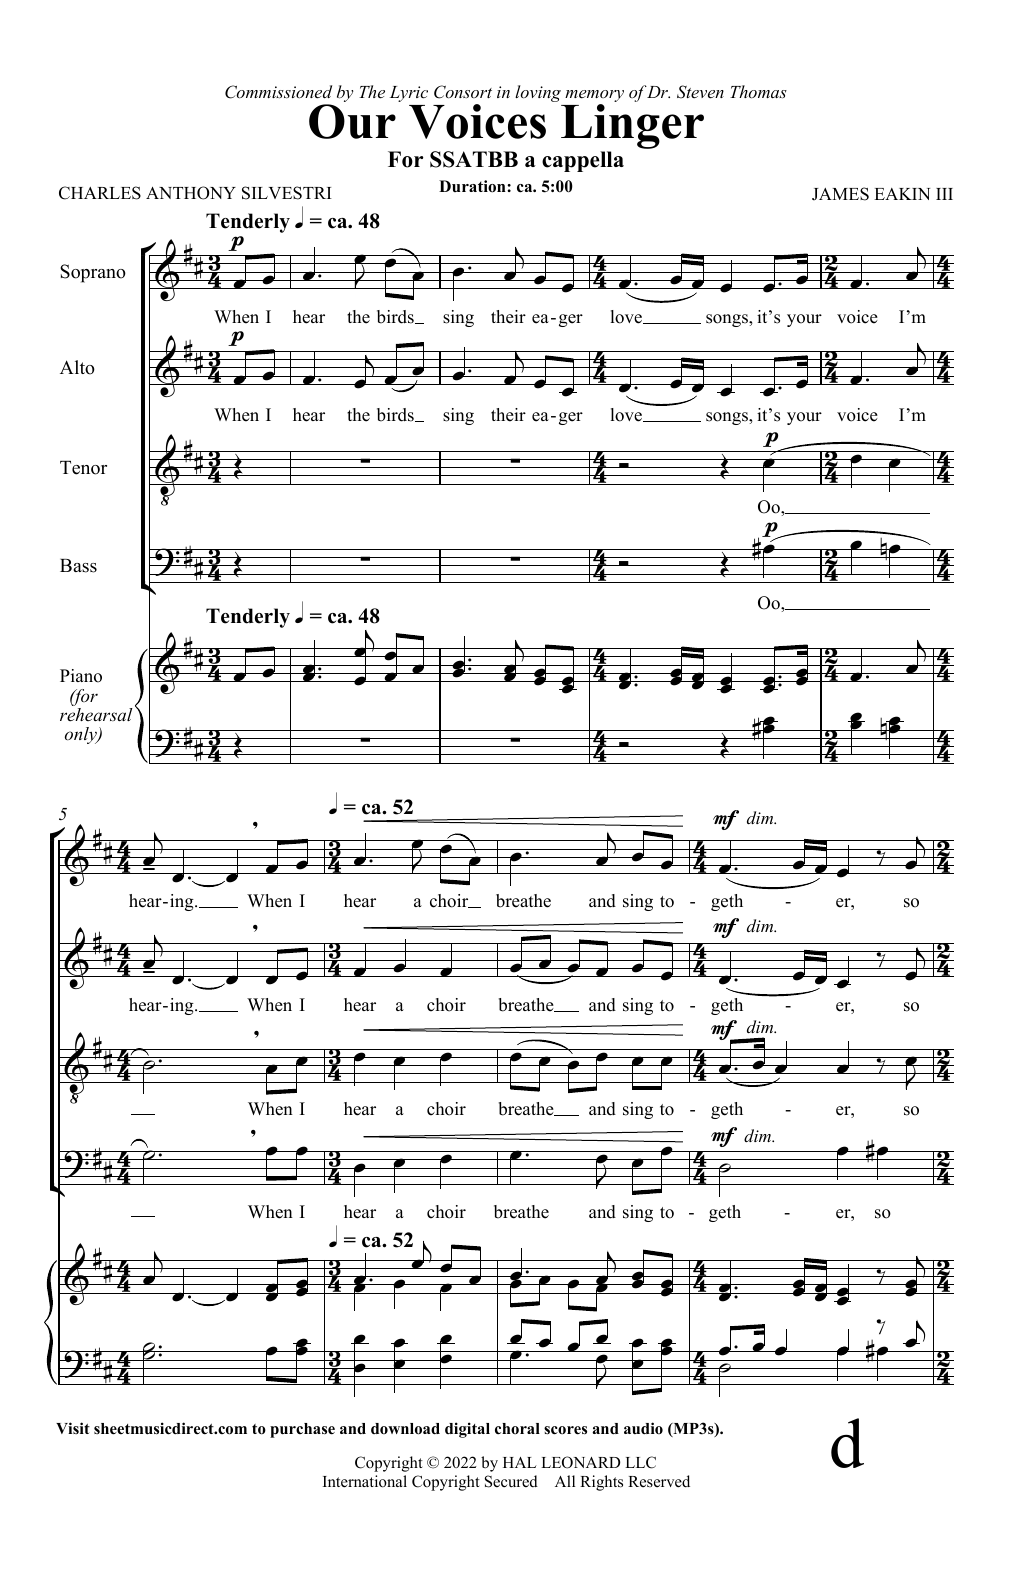 Download Charles Anthony Silvestri and James Our Voices Linger Sheet Music